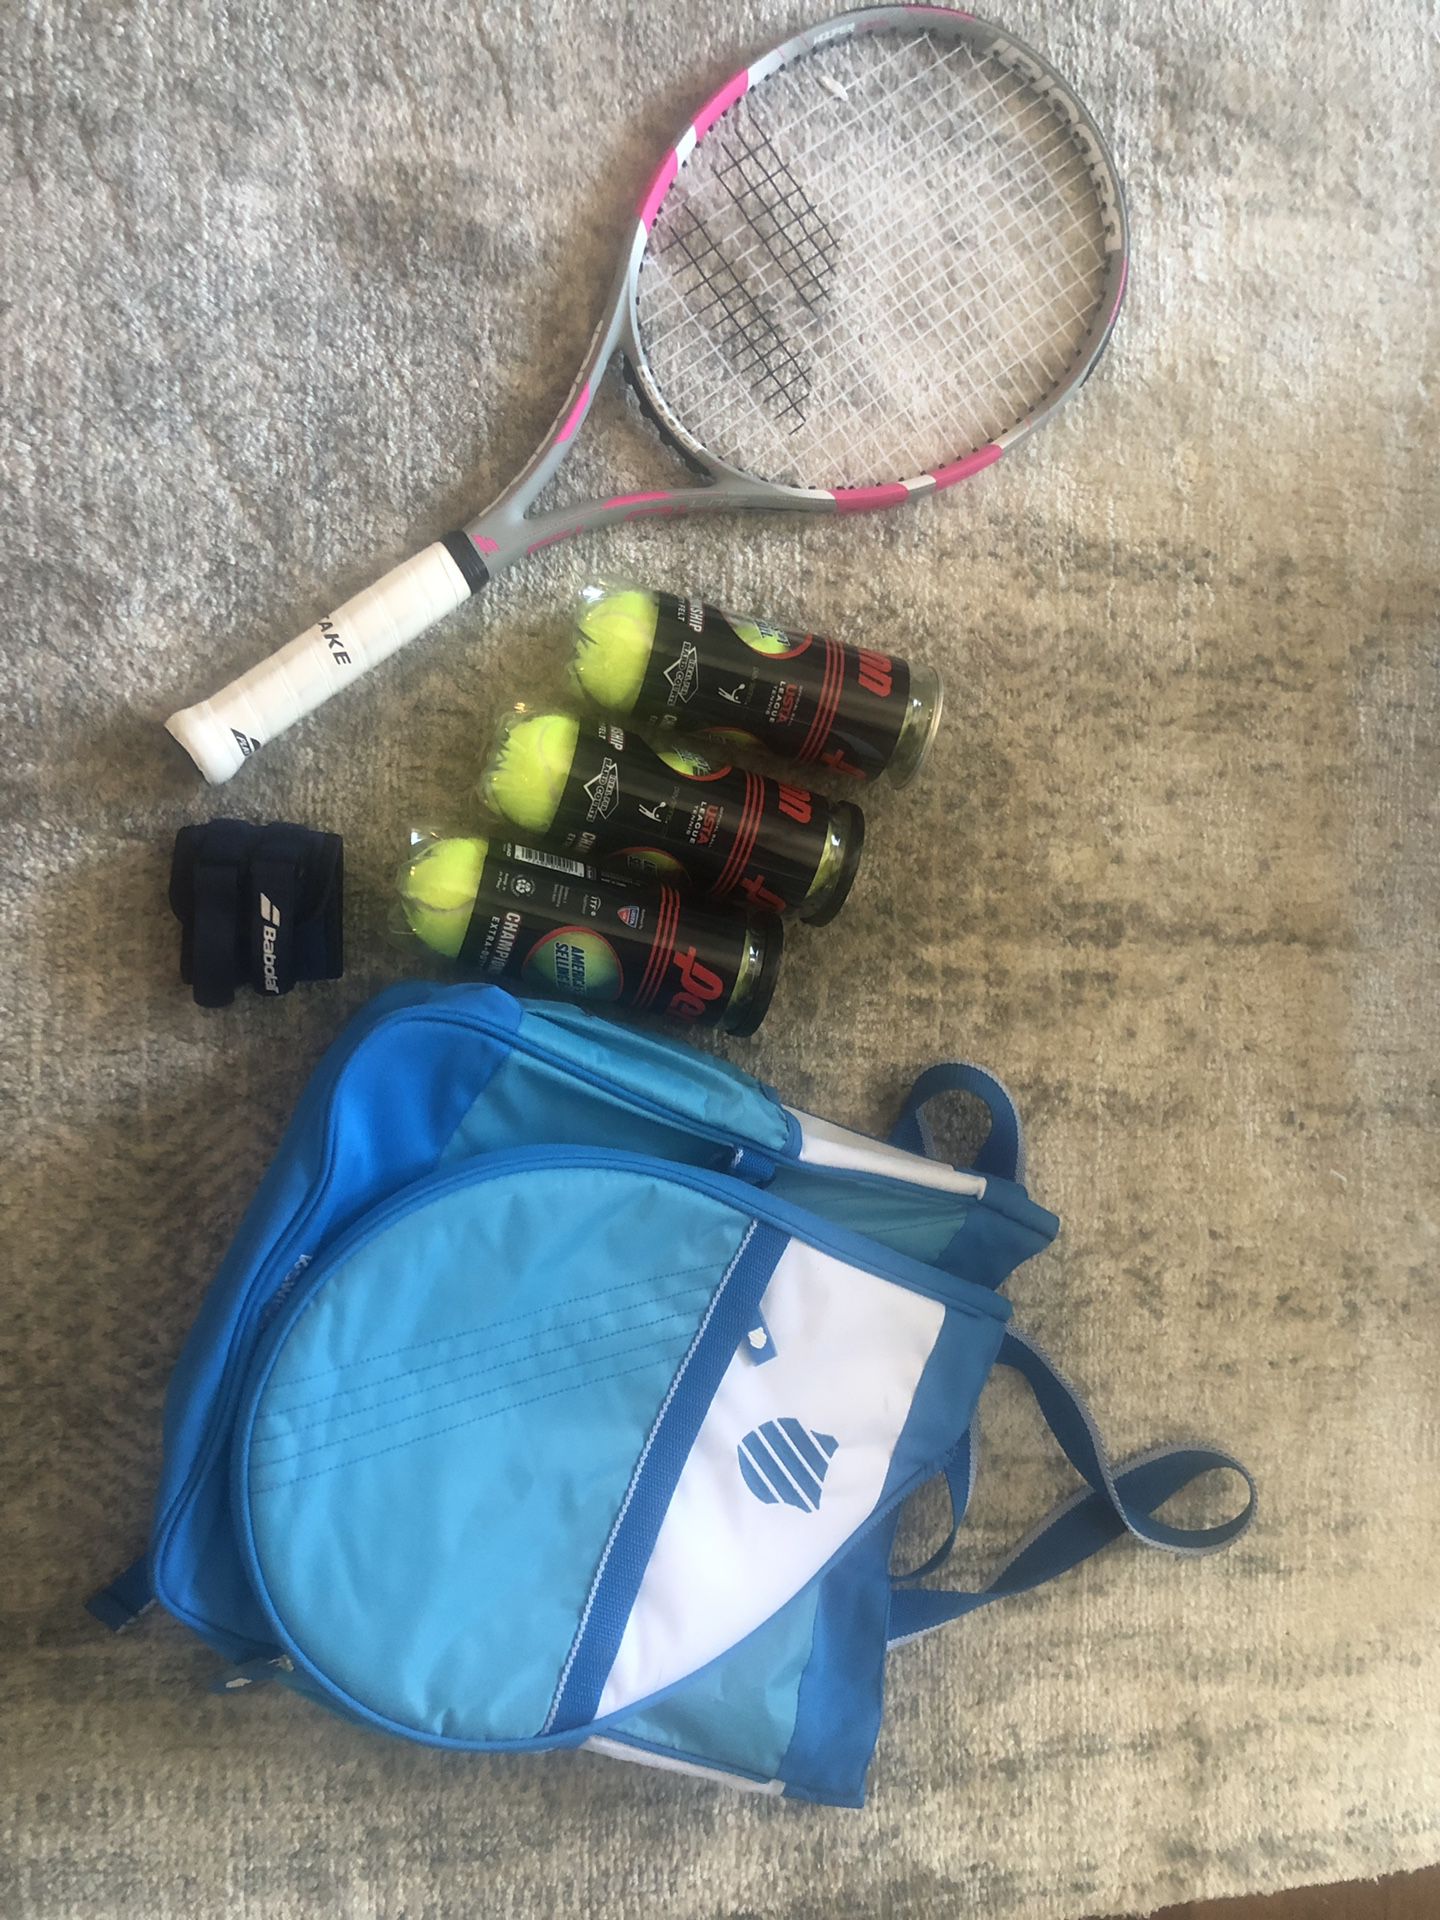 Babolat tennis racket and accessories